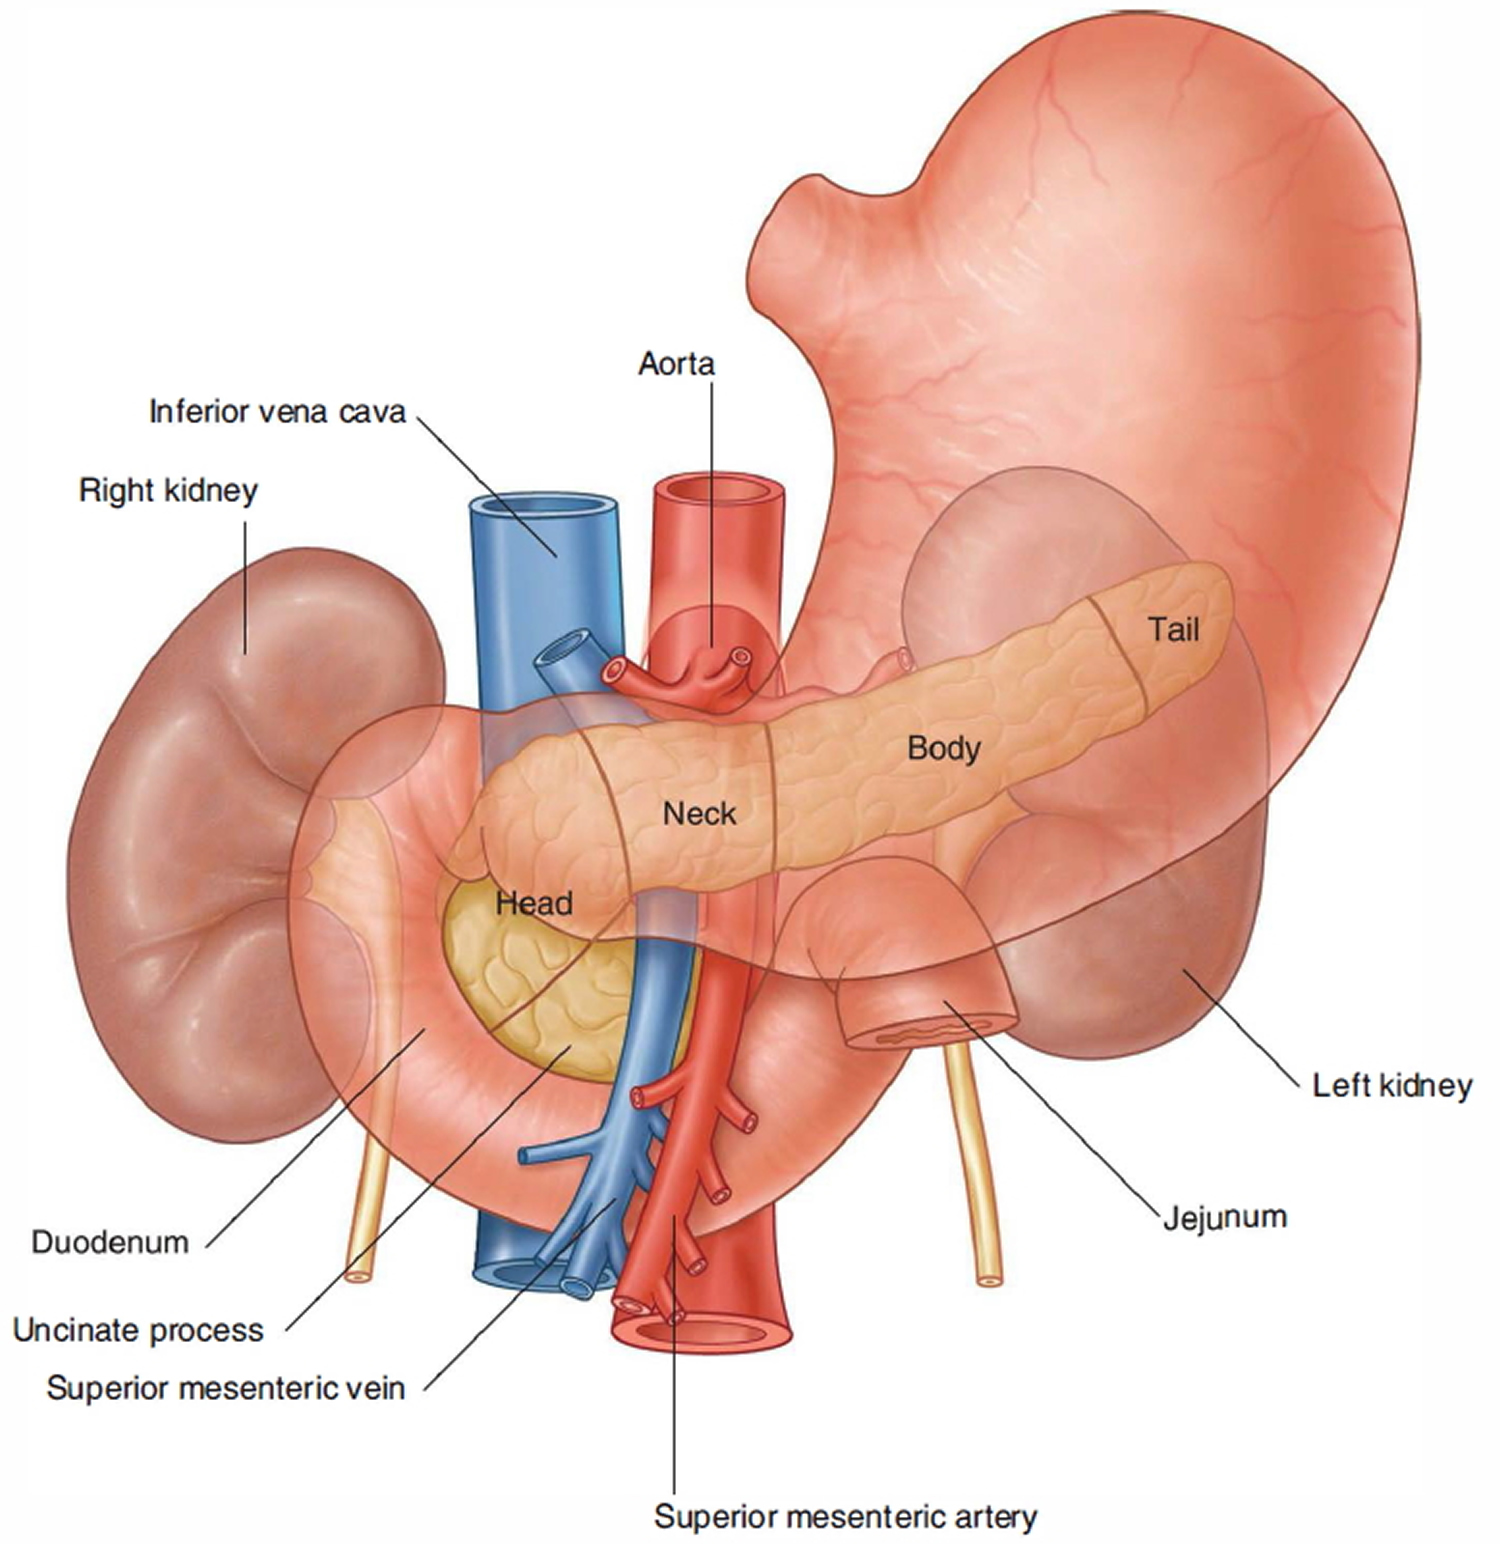 Pancreas Location, Anatomy and Function in Digestion